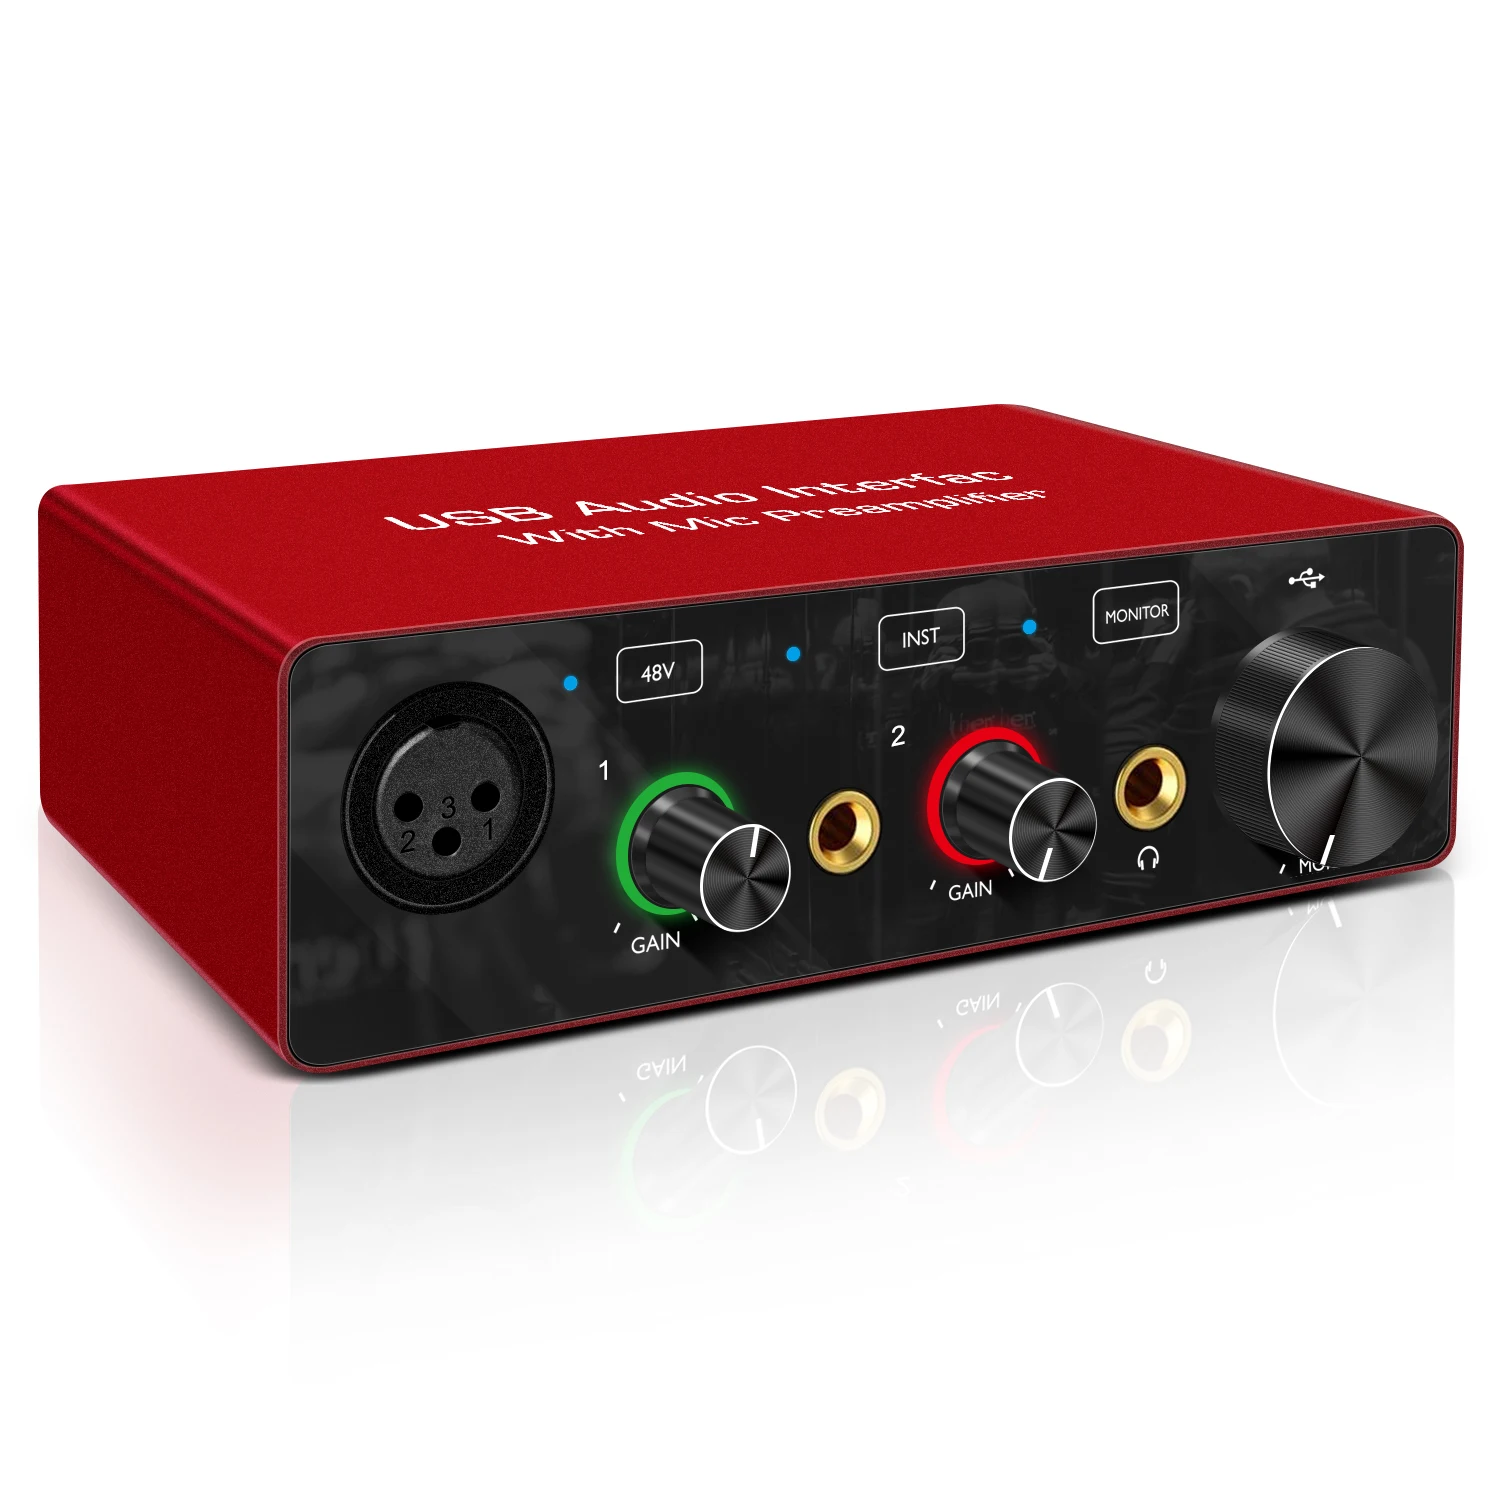 

48V Phantom Power Supply and Effect studio monitor music speakers external sound card home recording audio interface usb, Oem